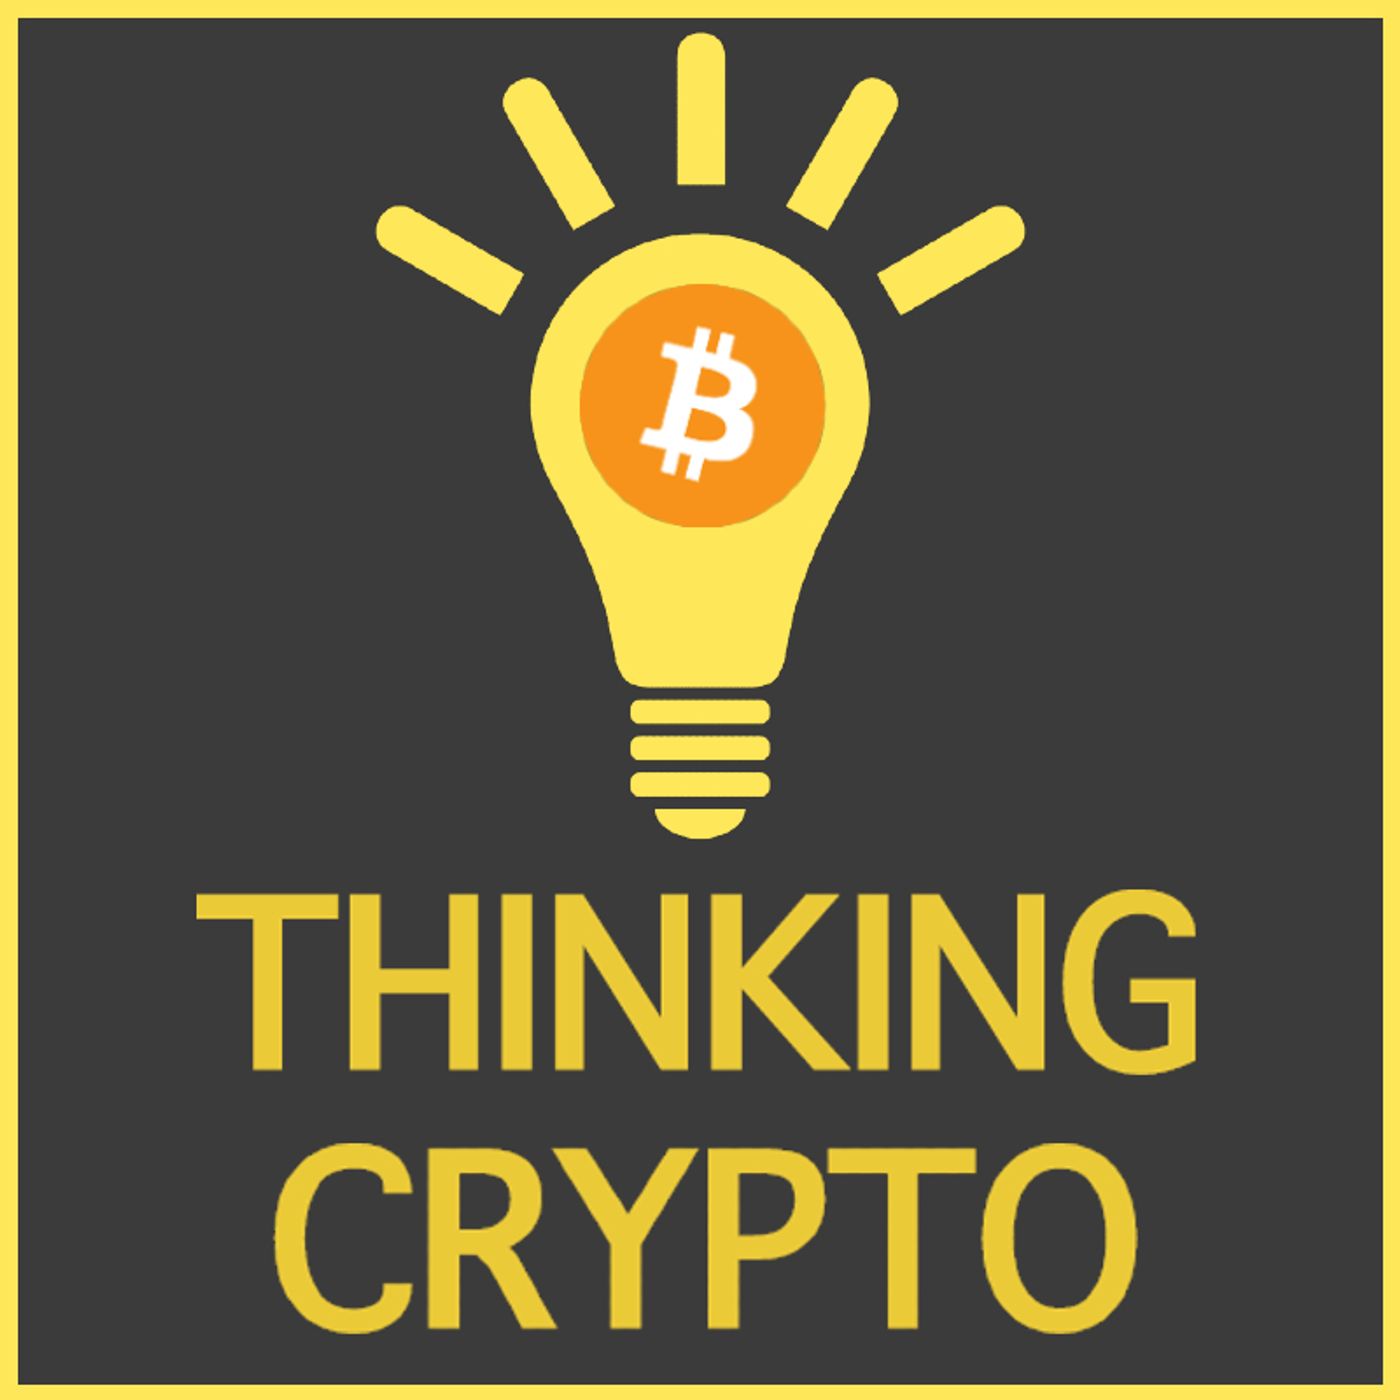 Fresh update on "central bank" discussed on Thinking Crypto News & Interviews